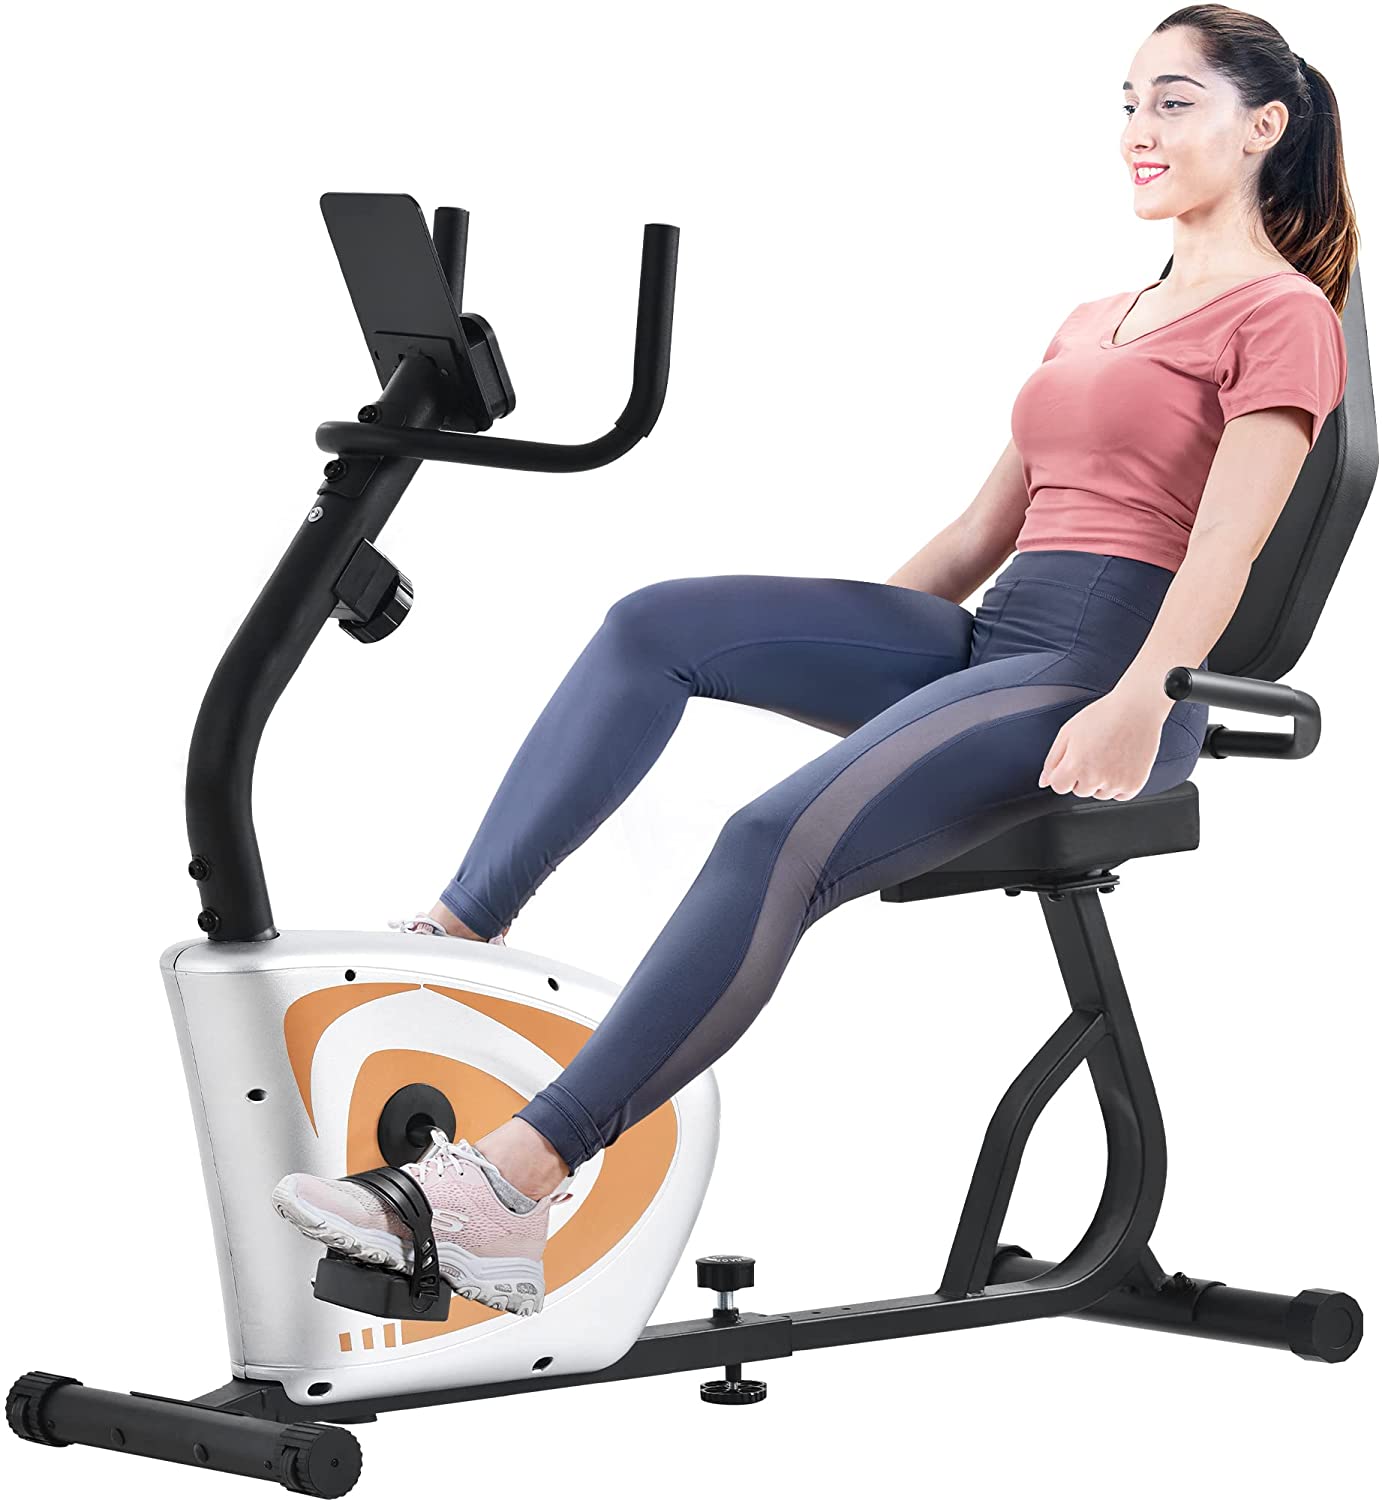 YY Style Indoor Recumbent Exercise Bike with Wheel, Stationary Exercise Bike with LCD and Bluetooth Monitor, Fitness Exercise Equipment for Home and Office, 8-level Resistance, 380 Lbs. Capacity, R092 - image 1 of 8